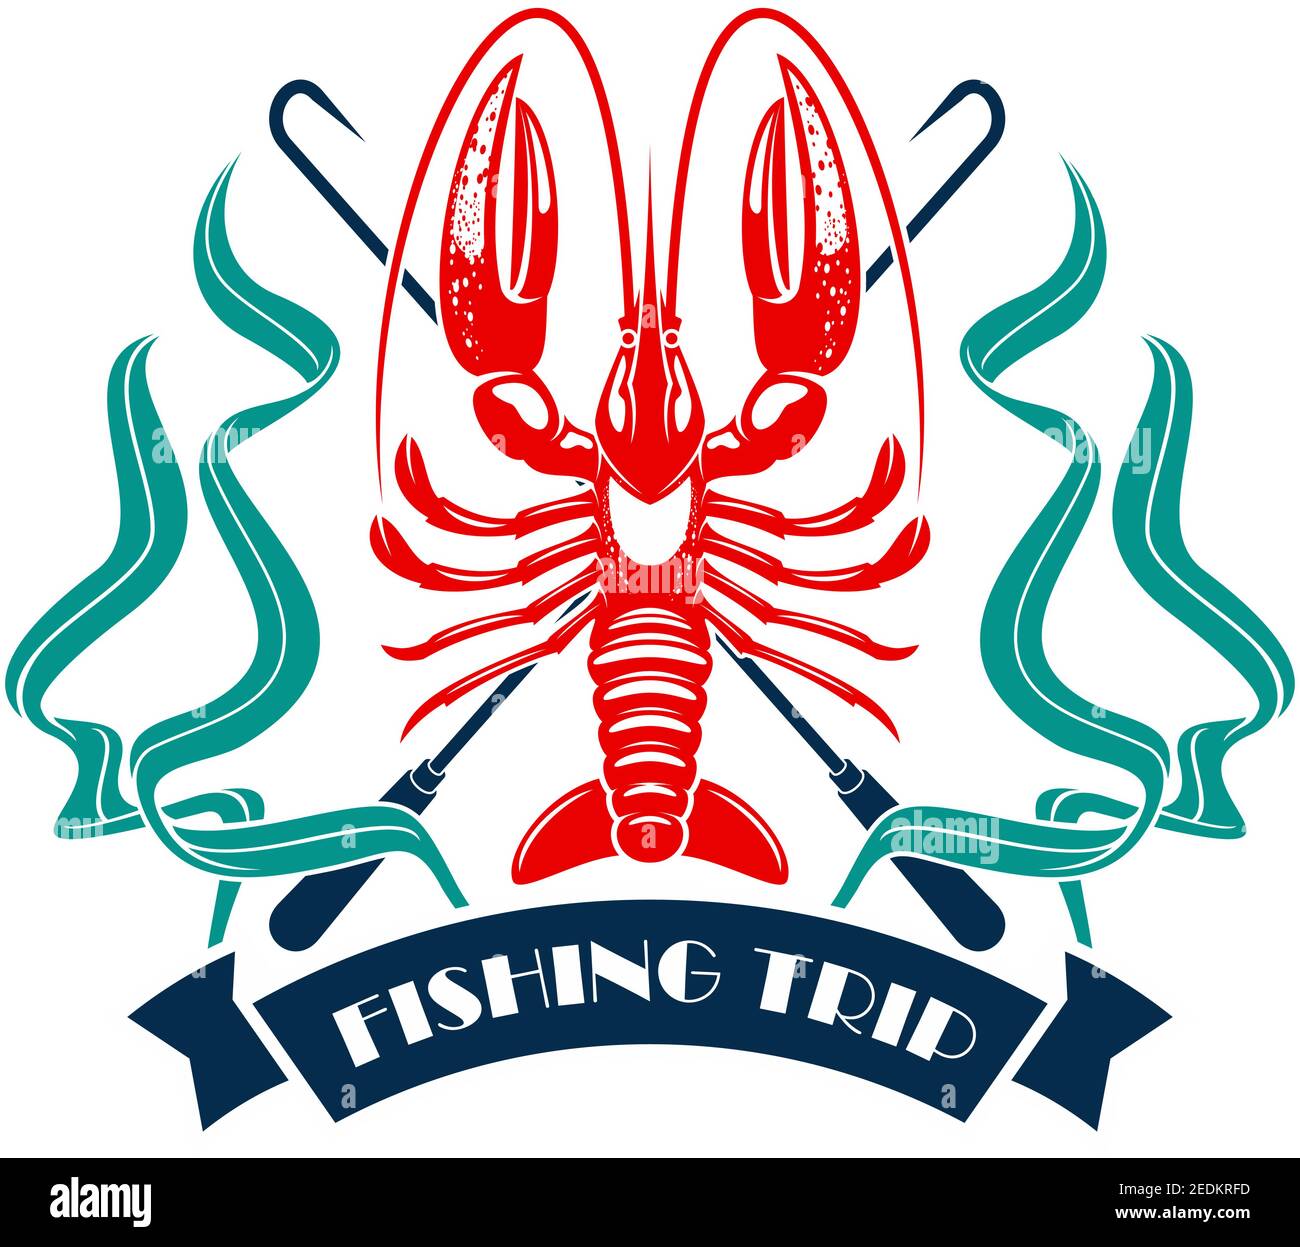 Fishing vector icon or emblem of lobster crayfish or crab seafood mollusk and seaweed, fish catch harpoon or spear tackle and ribbon for fishery, fish Stock Vector